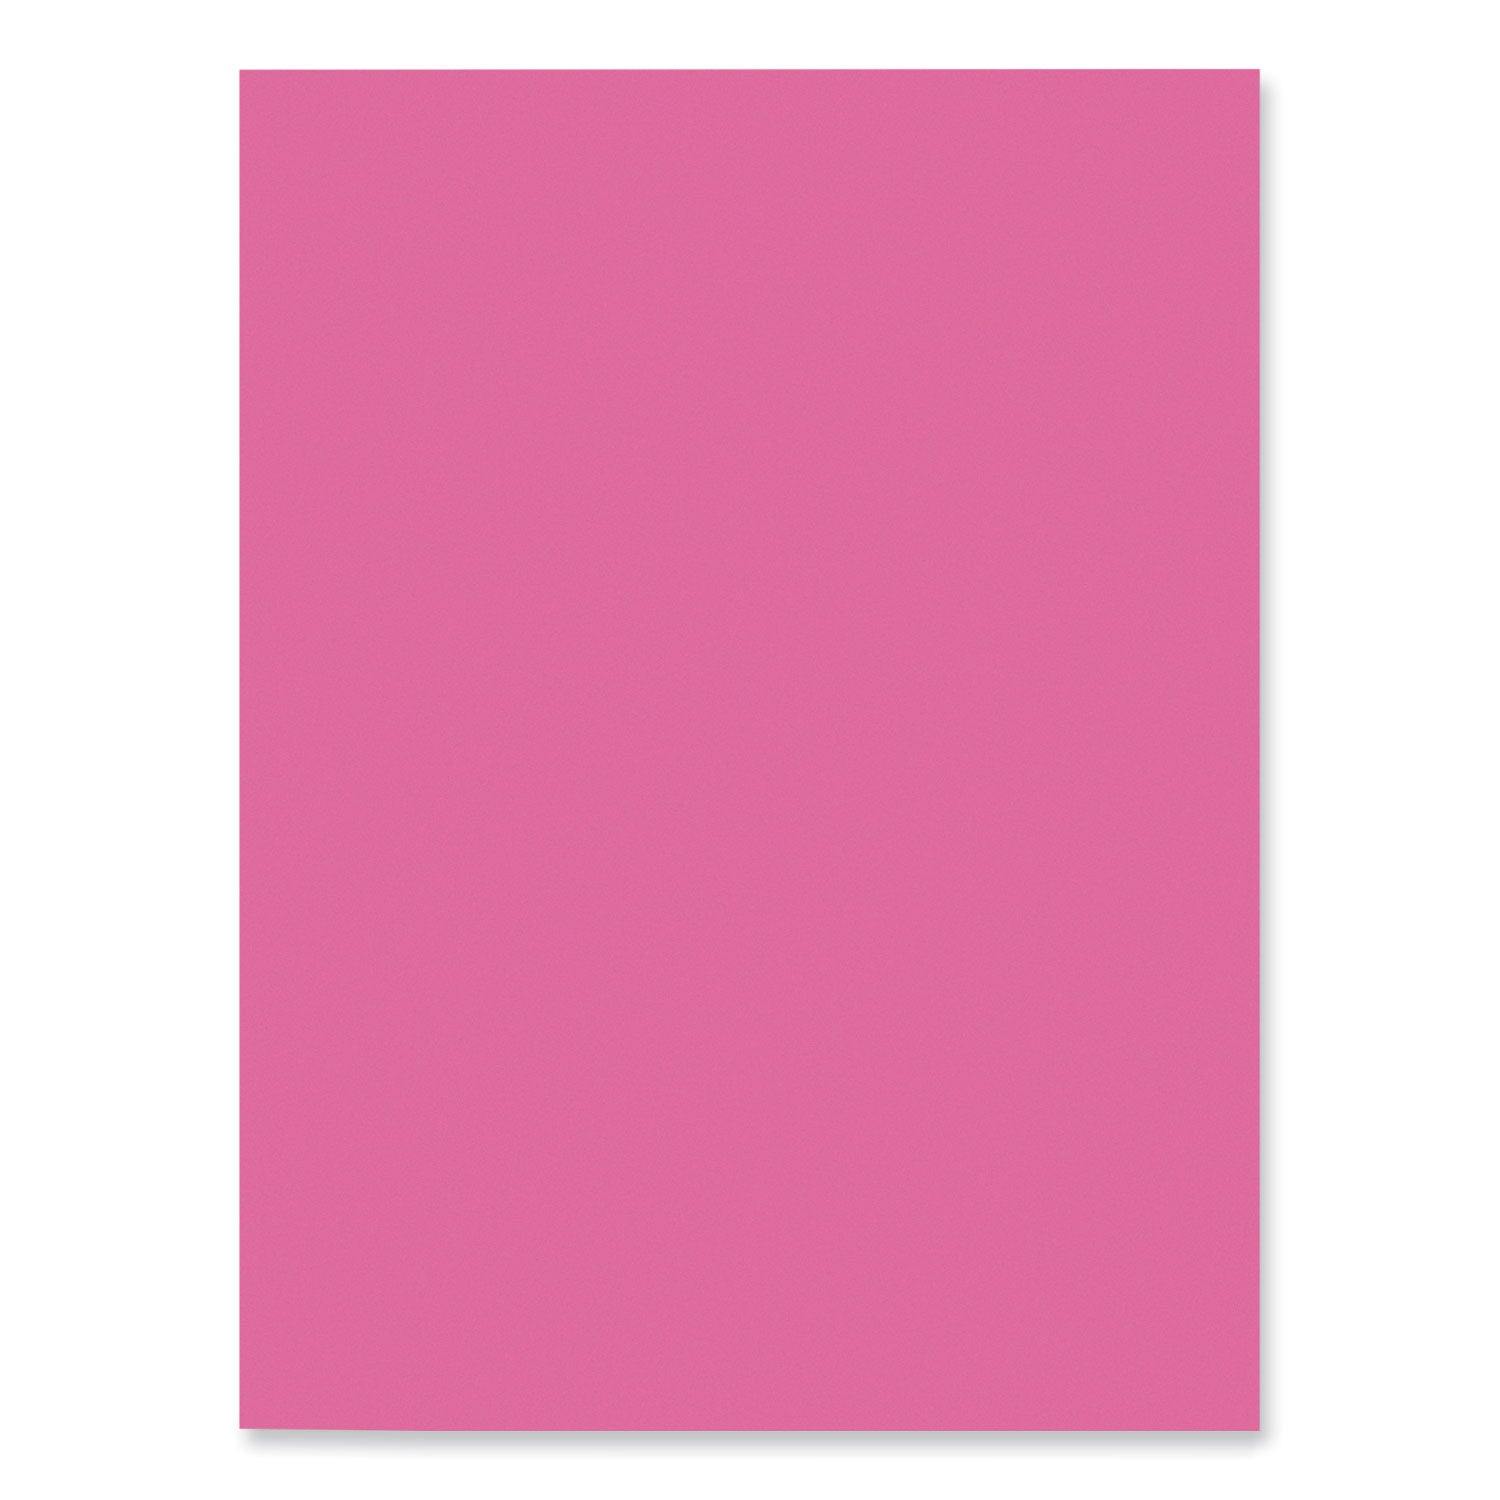 SunWorks Construction Paper, 50 lb Text Weight, 9 x 12, Hot Pink, 50/Pack - 